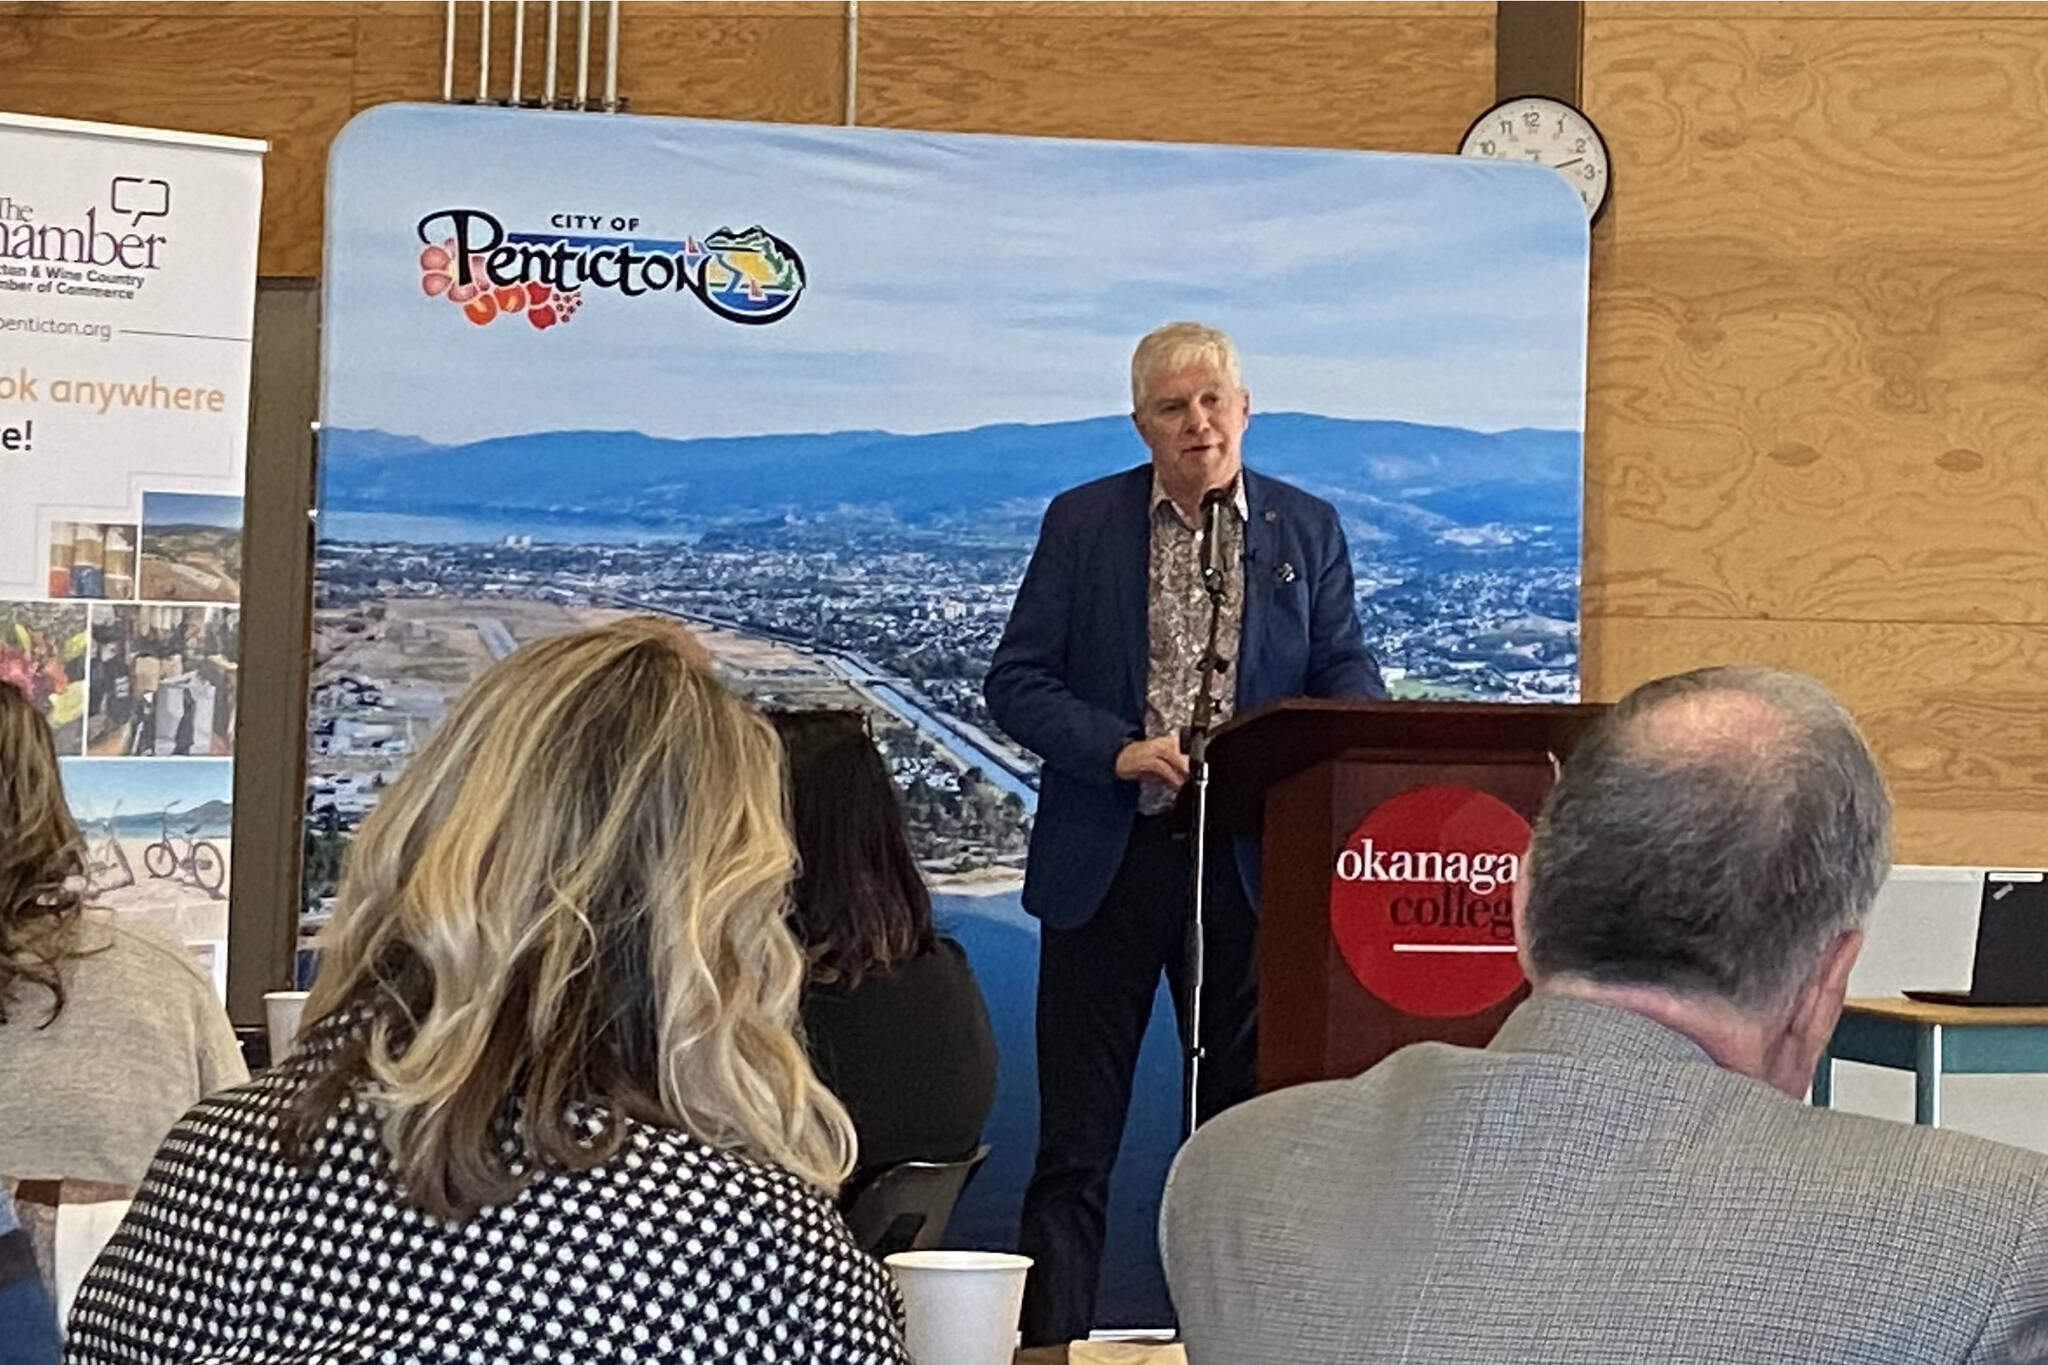 Penticton mayor Julius Bloomfield addresses a large crowd at a Chamber held meeting at Okanagan College on March 8. The new mayor addressed housing, community safety and touched on the budget. (Monique Tamminga Western News)